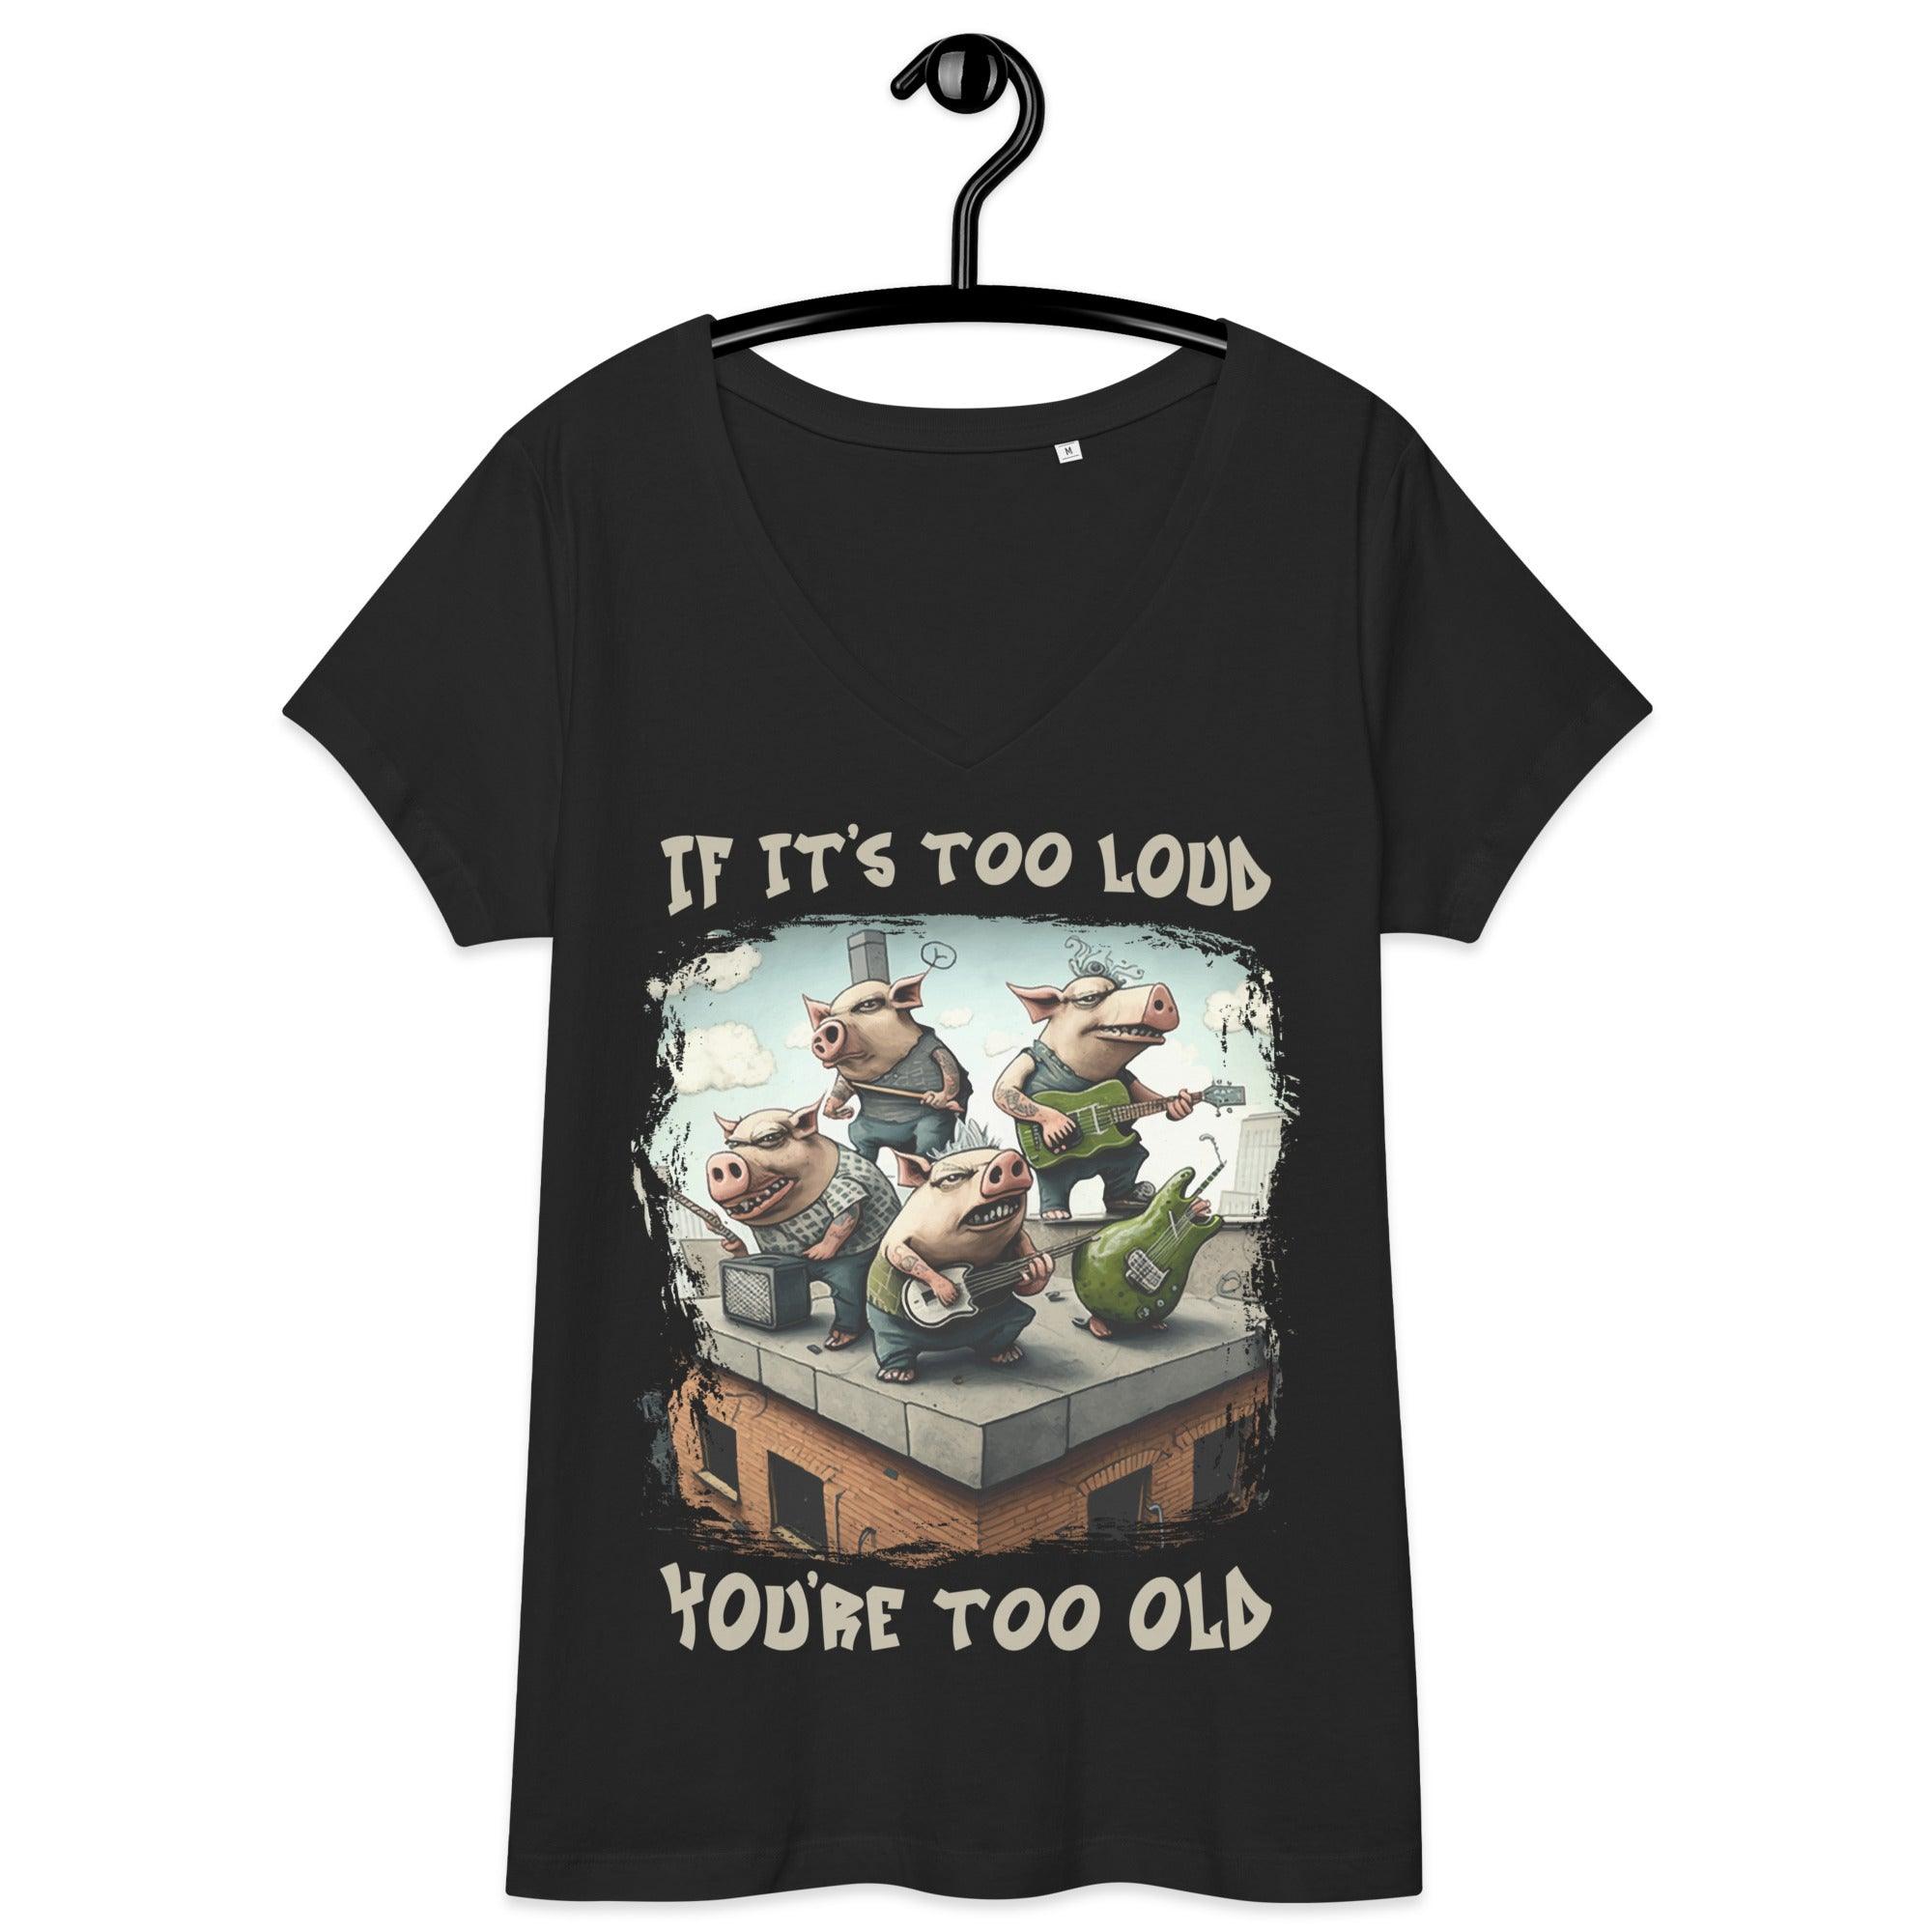 You're too old women’s fitted v-neck t-shirt - Beyond T-shirts